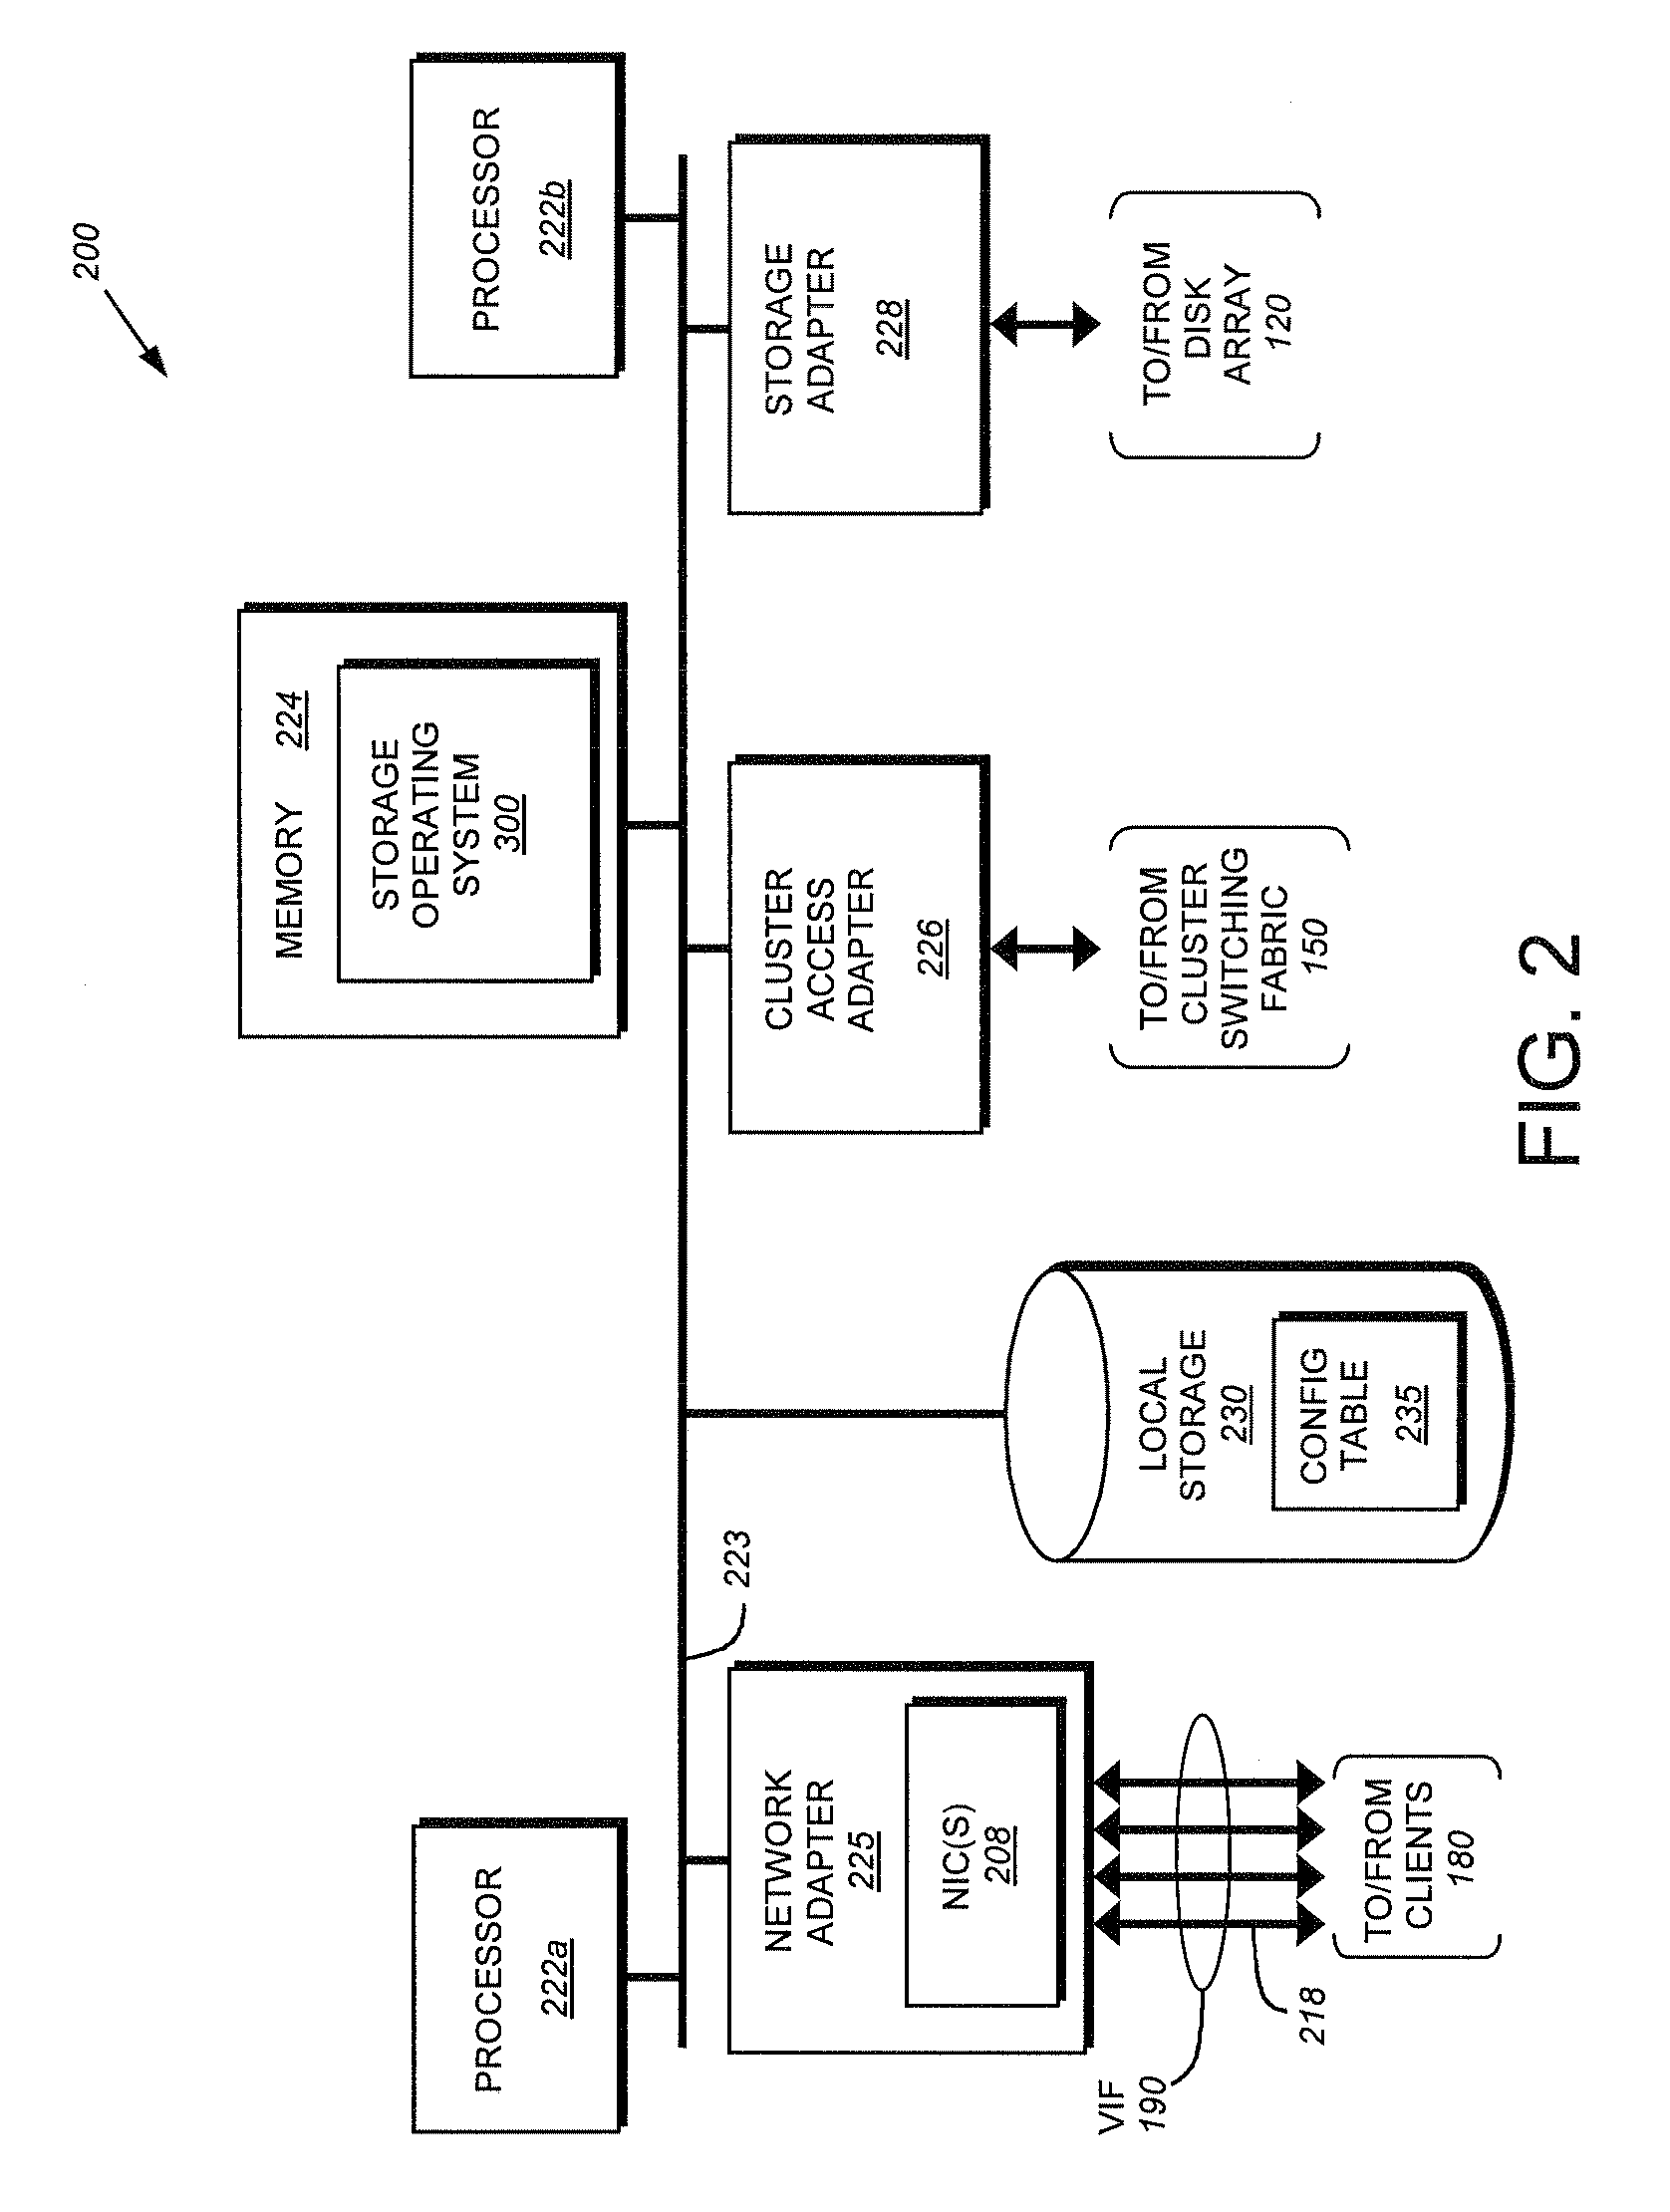 System and method for virtual interface failover within a cluster